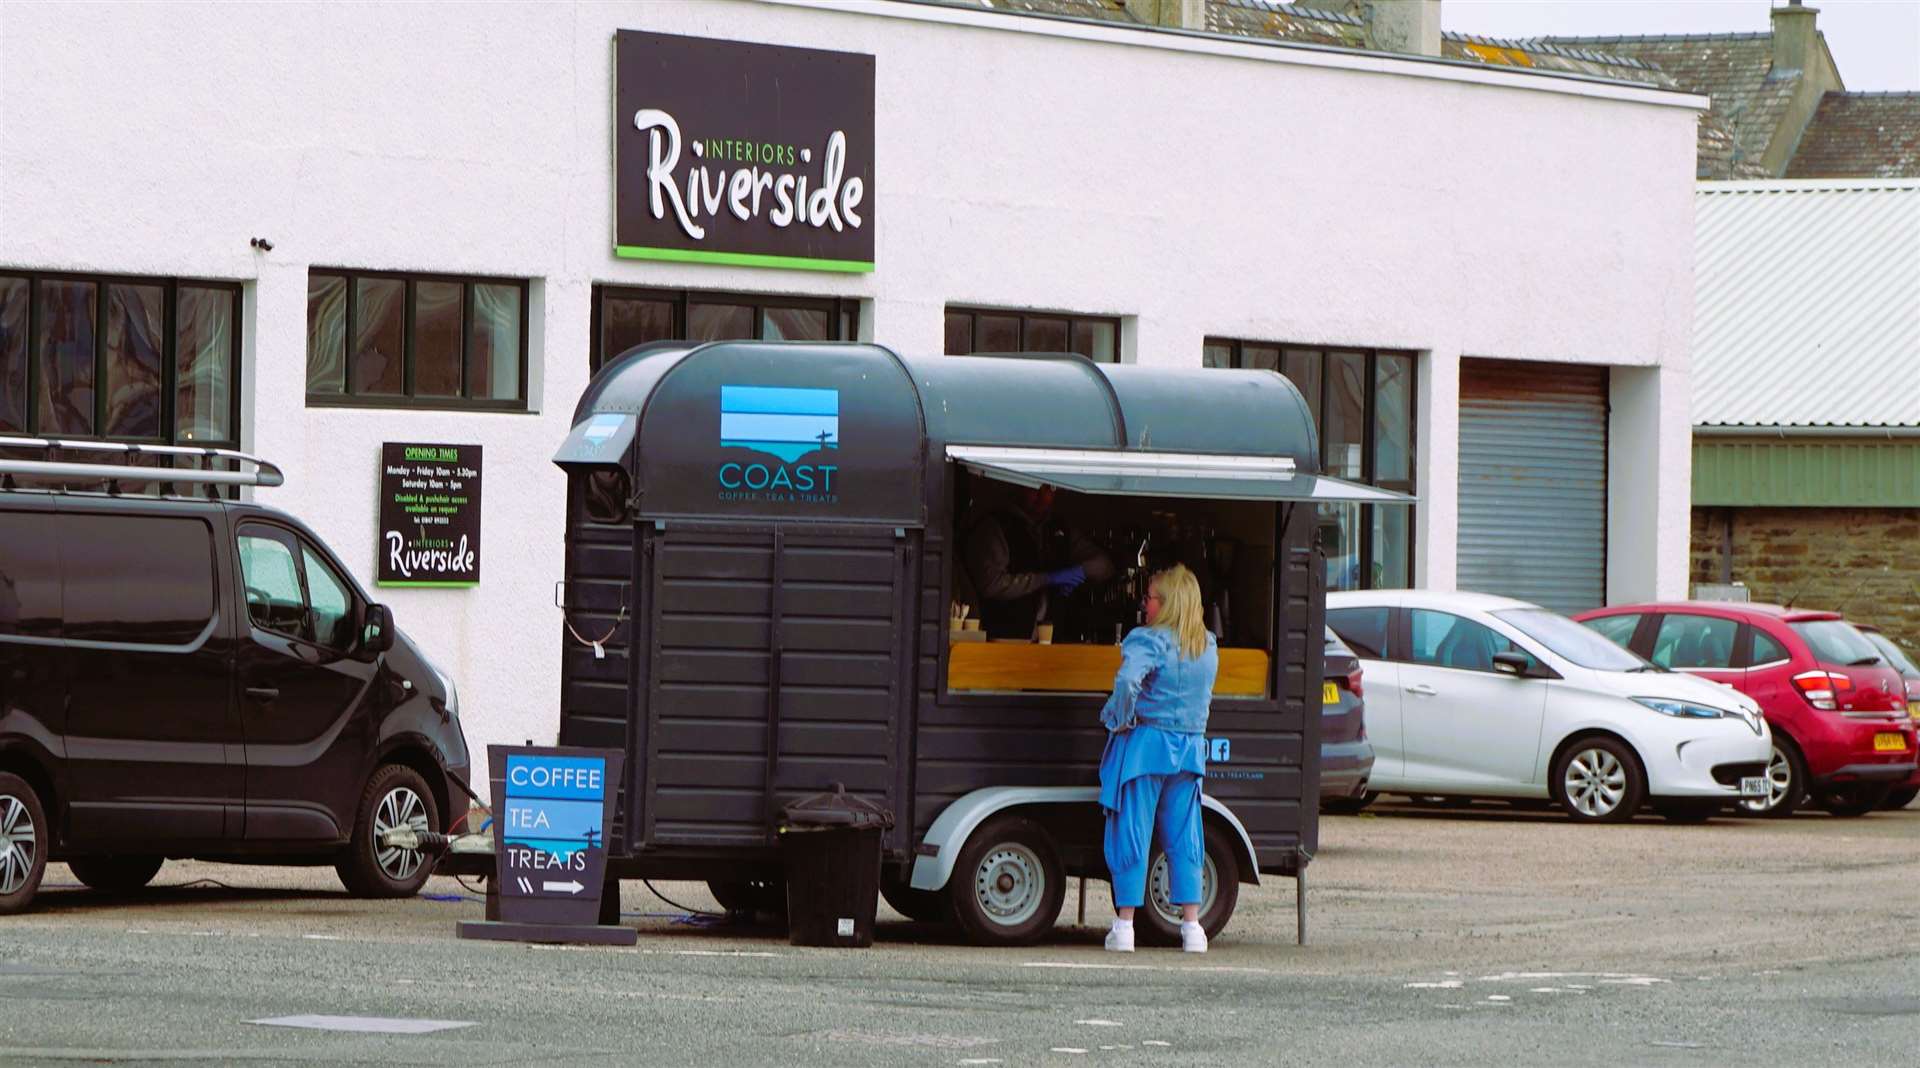 Refreshments at hand thanks to this mobile coffee shop. Picture: DGS